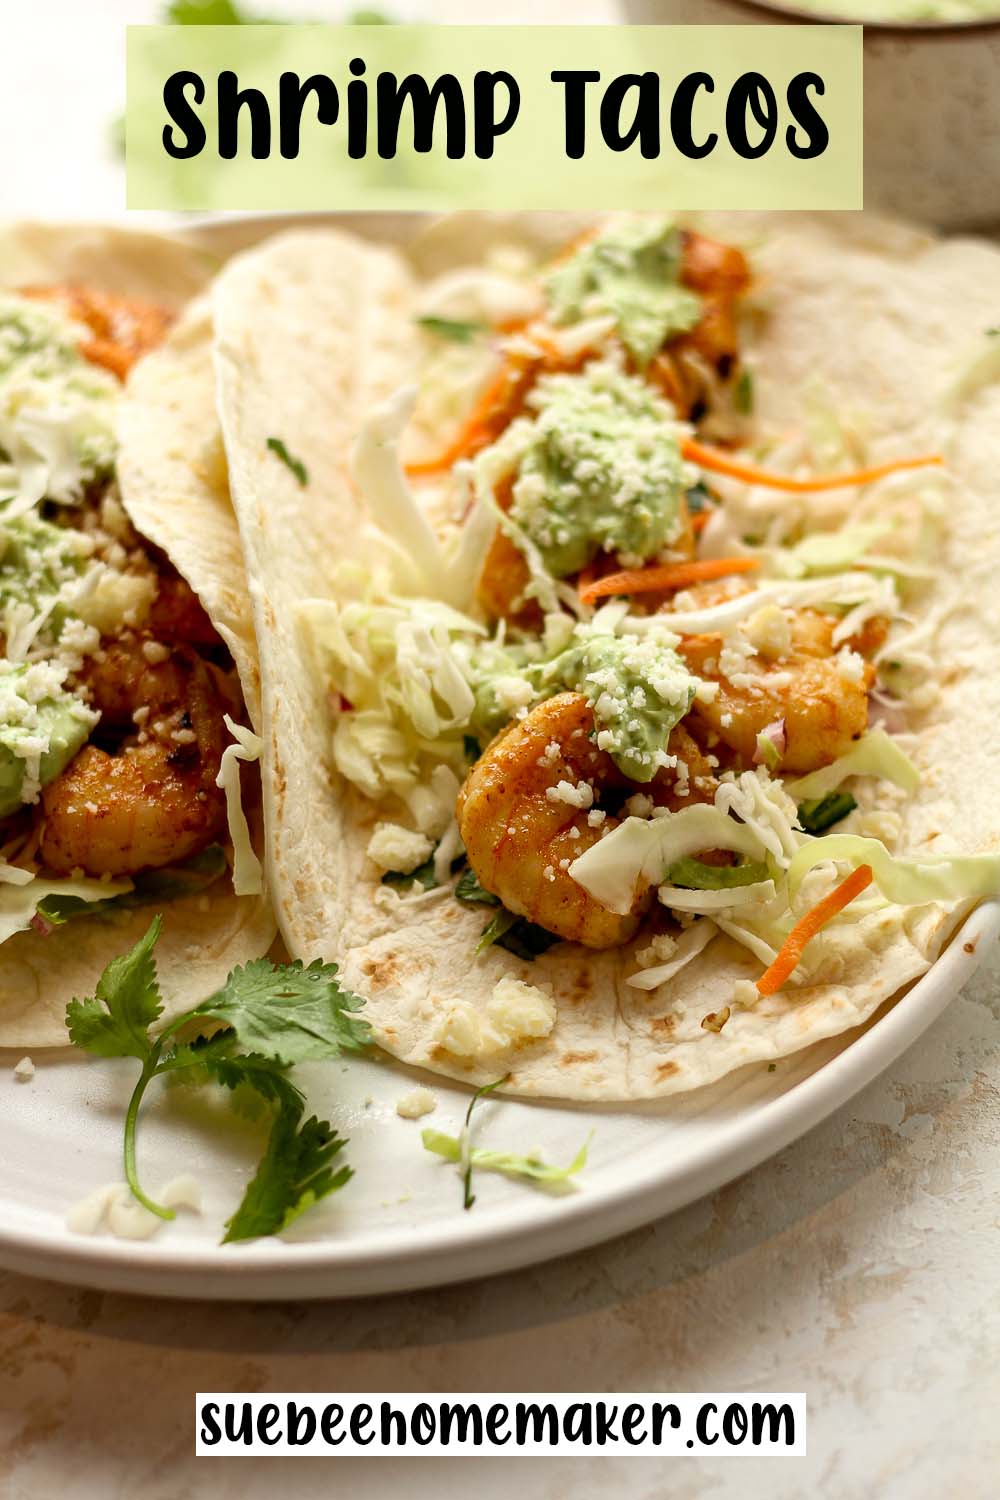 Side view of a plate of shrimp tacos.